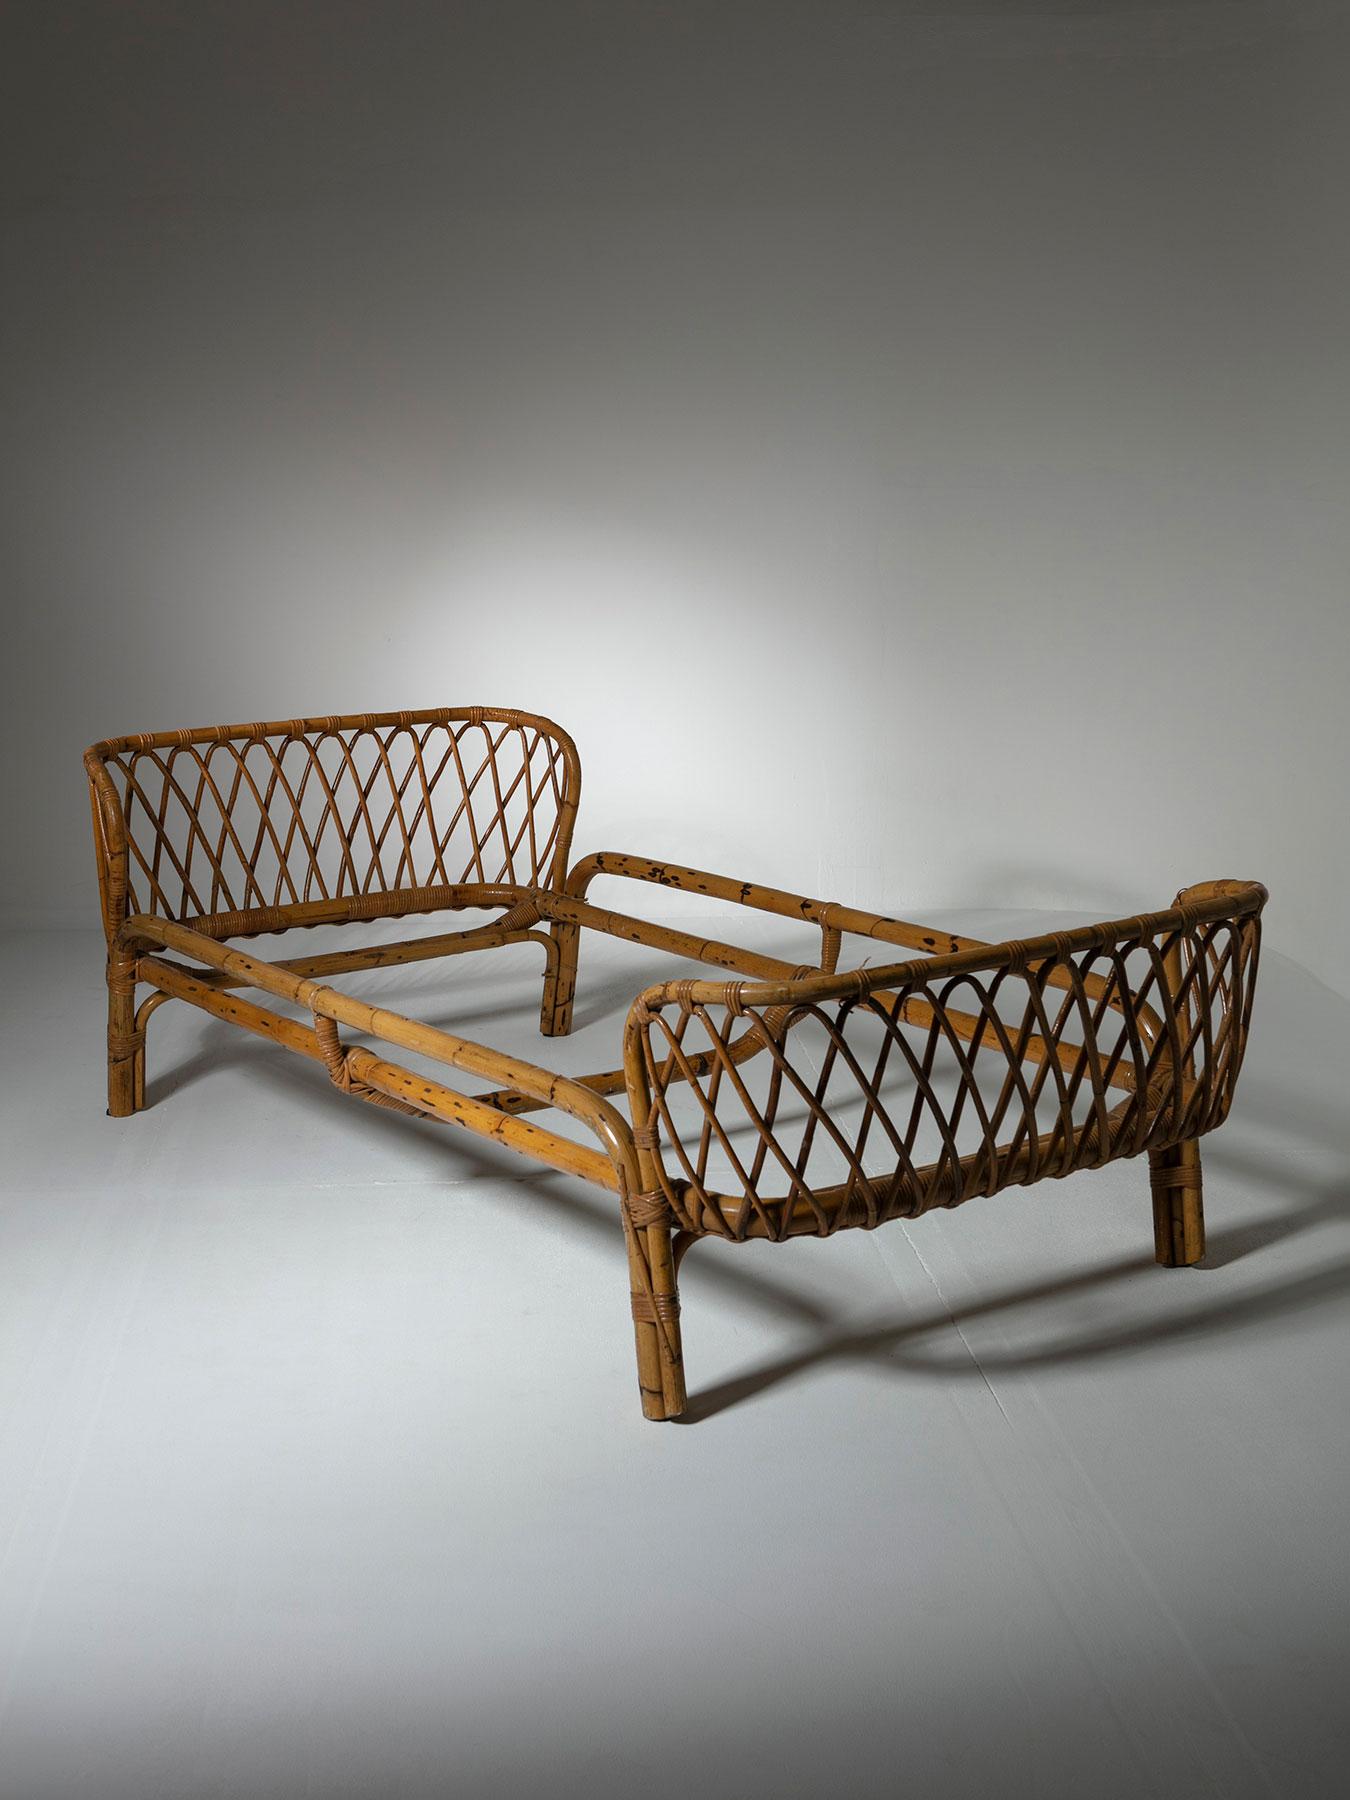 Gracefully shaped Italian 1960s wicker daybed.
A second piece is available.